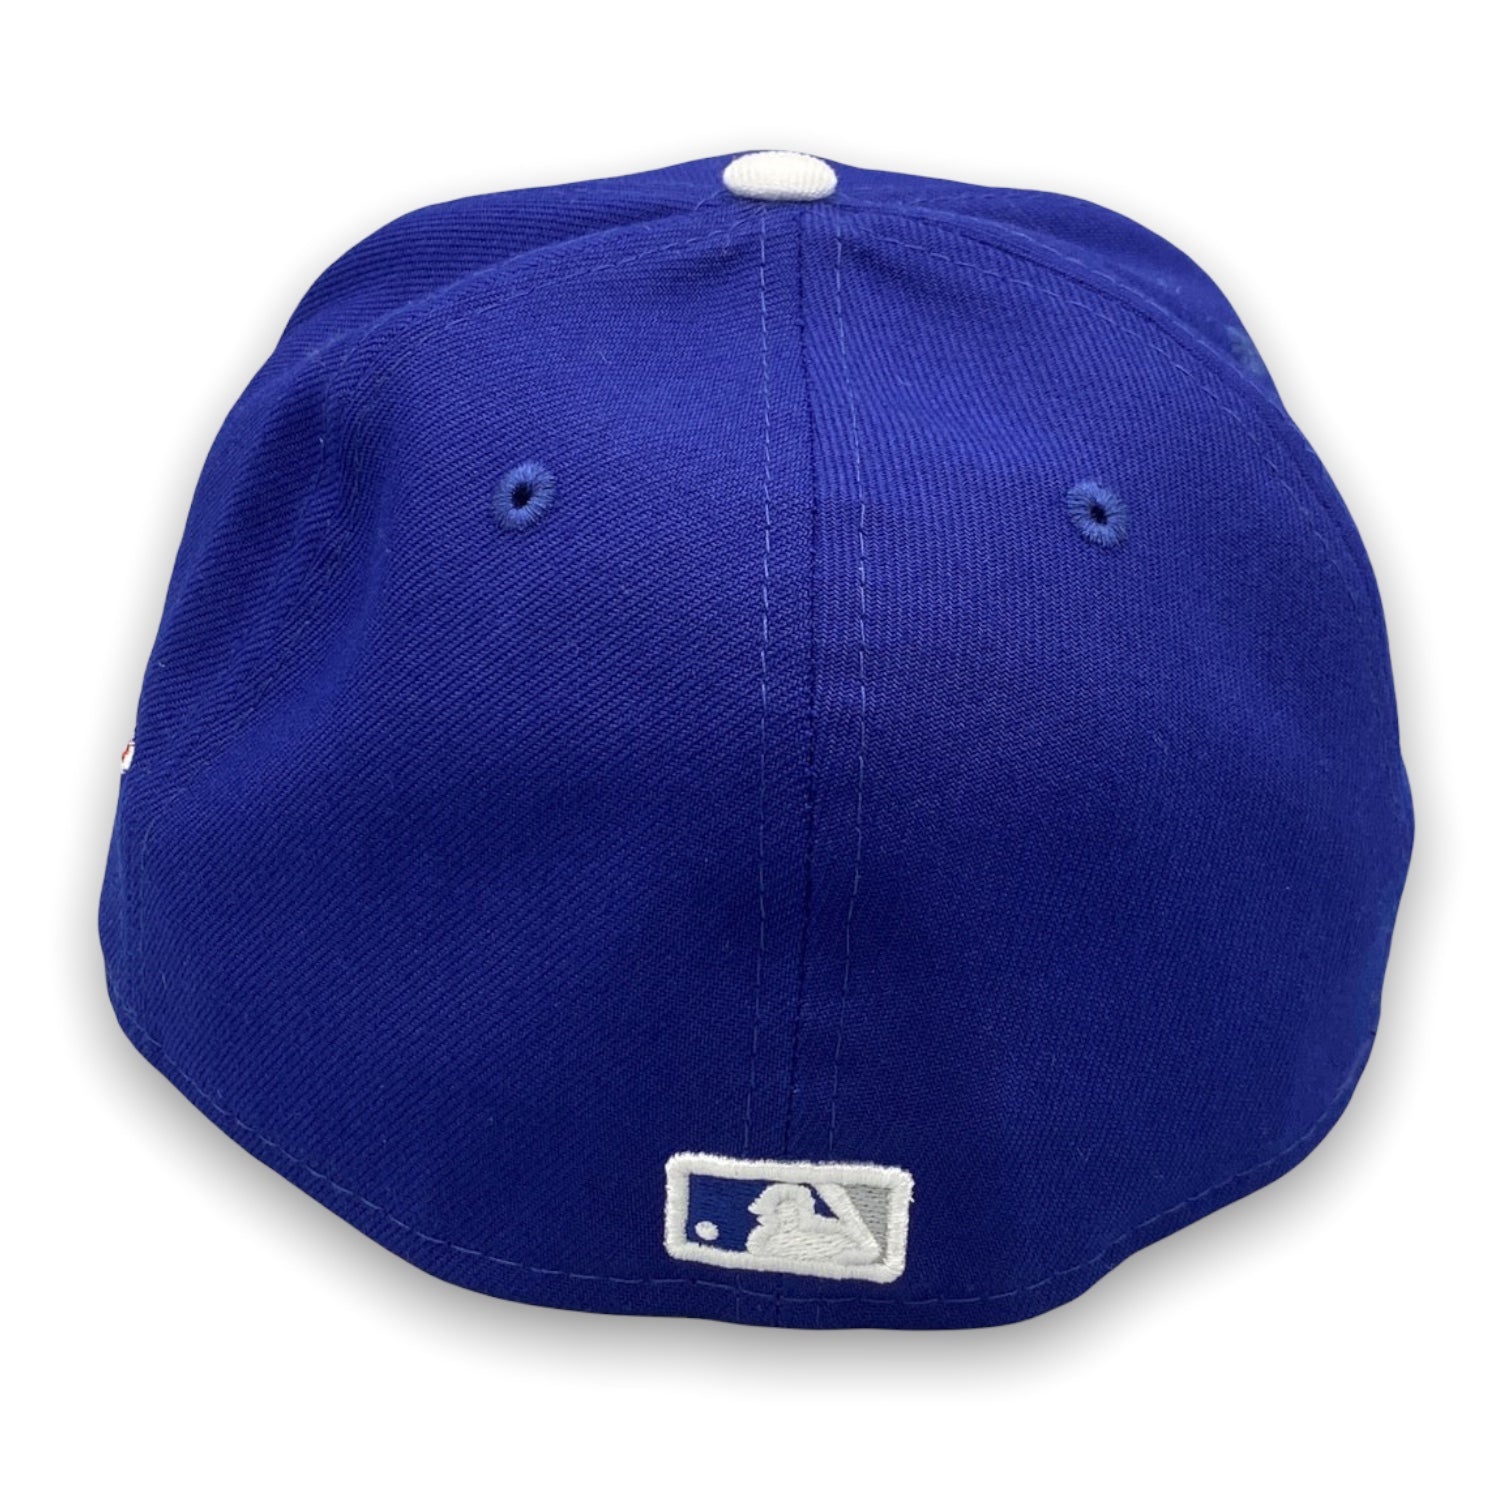 ROYAL BLUE) LOS ANGELES DODGERS 1988 WORLD SERIES PATCH PINK UV HAT (